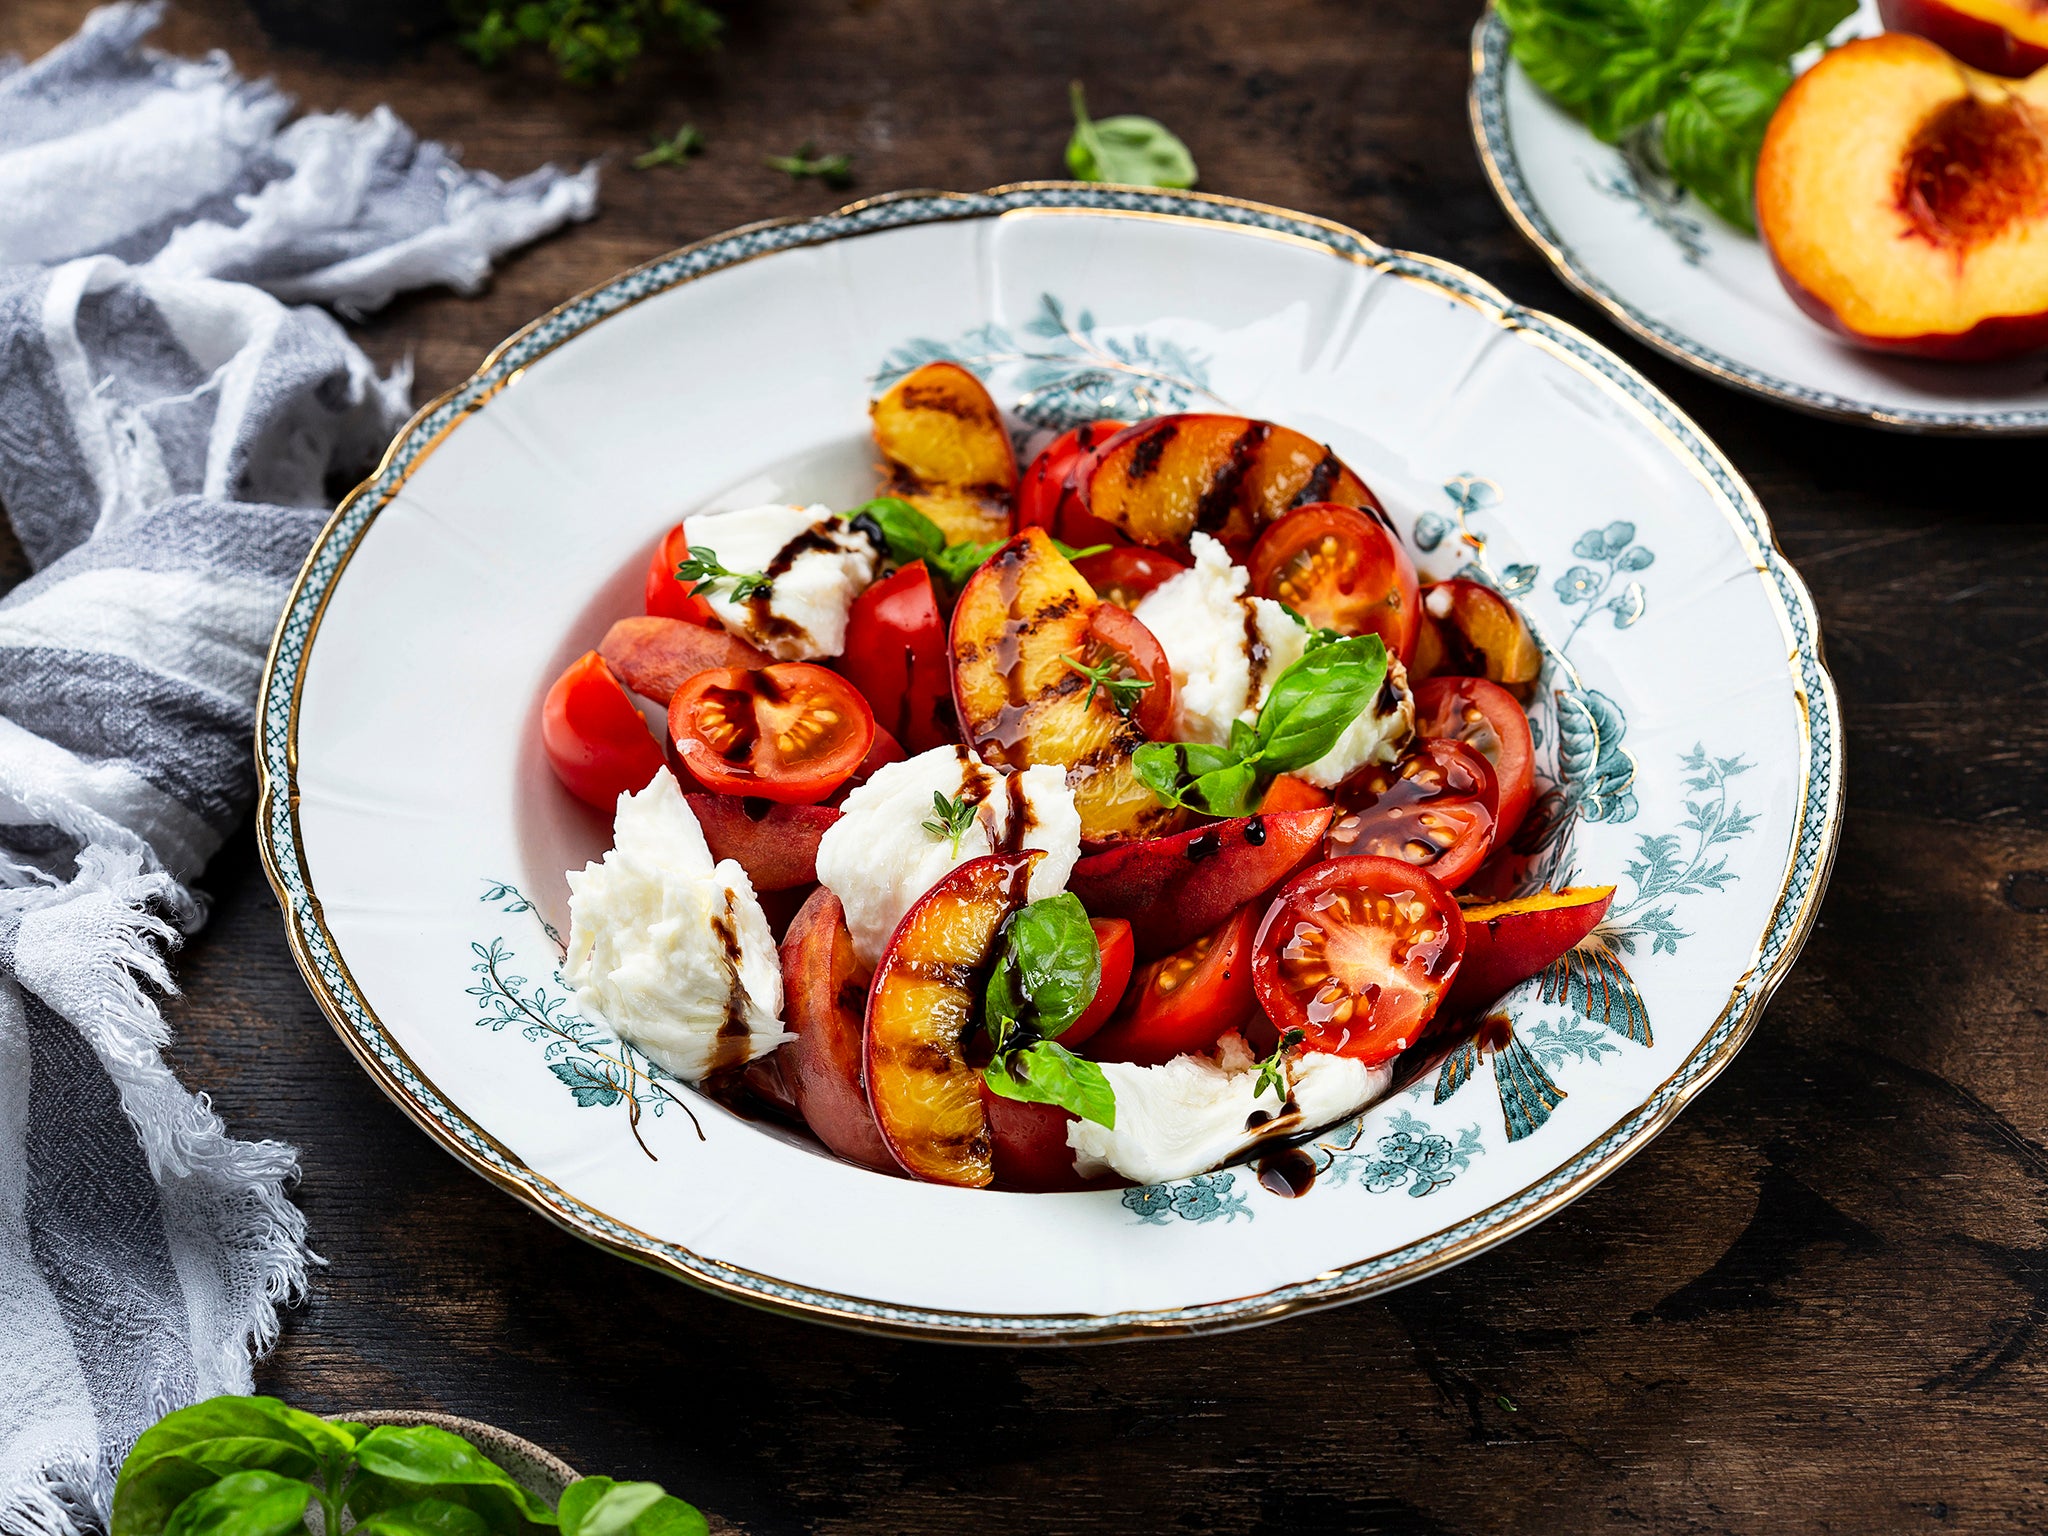 A standout caprese starts with great fruit – in this case, nectarines